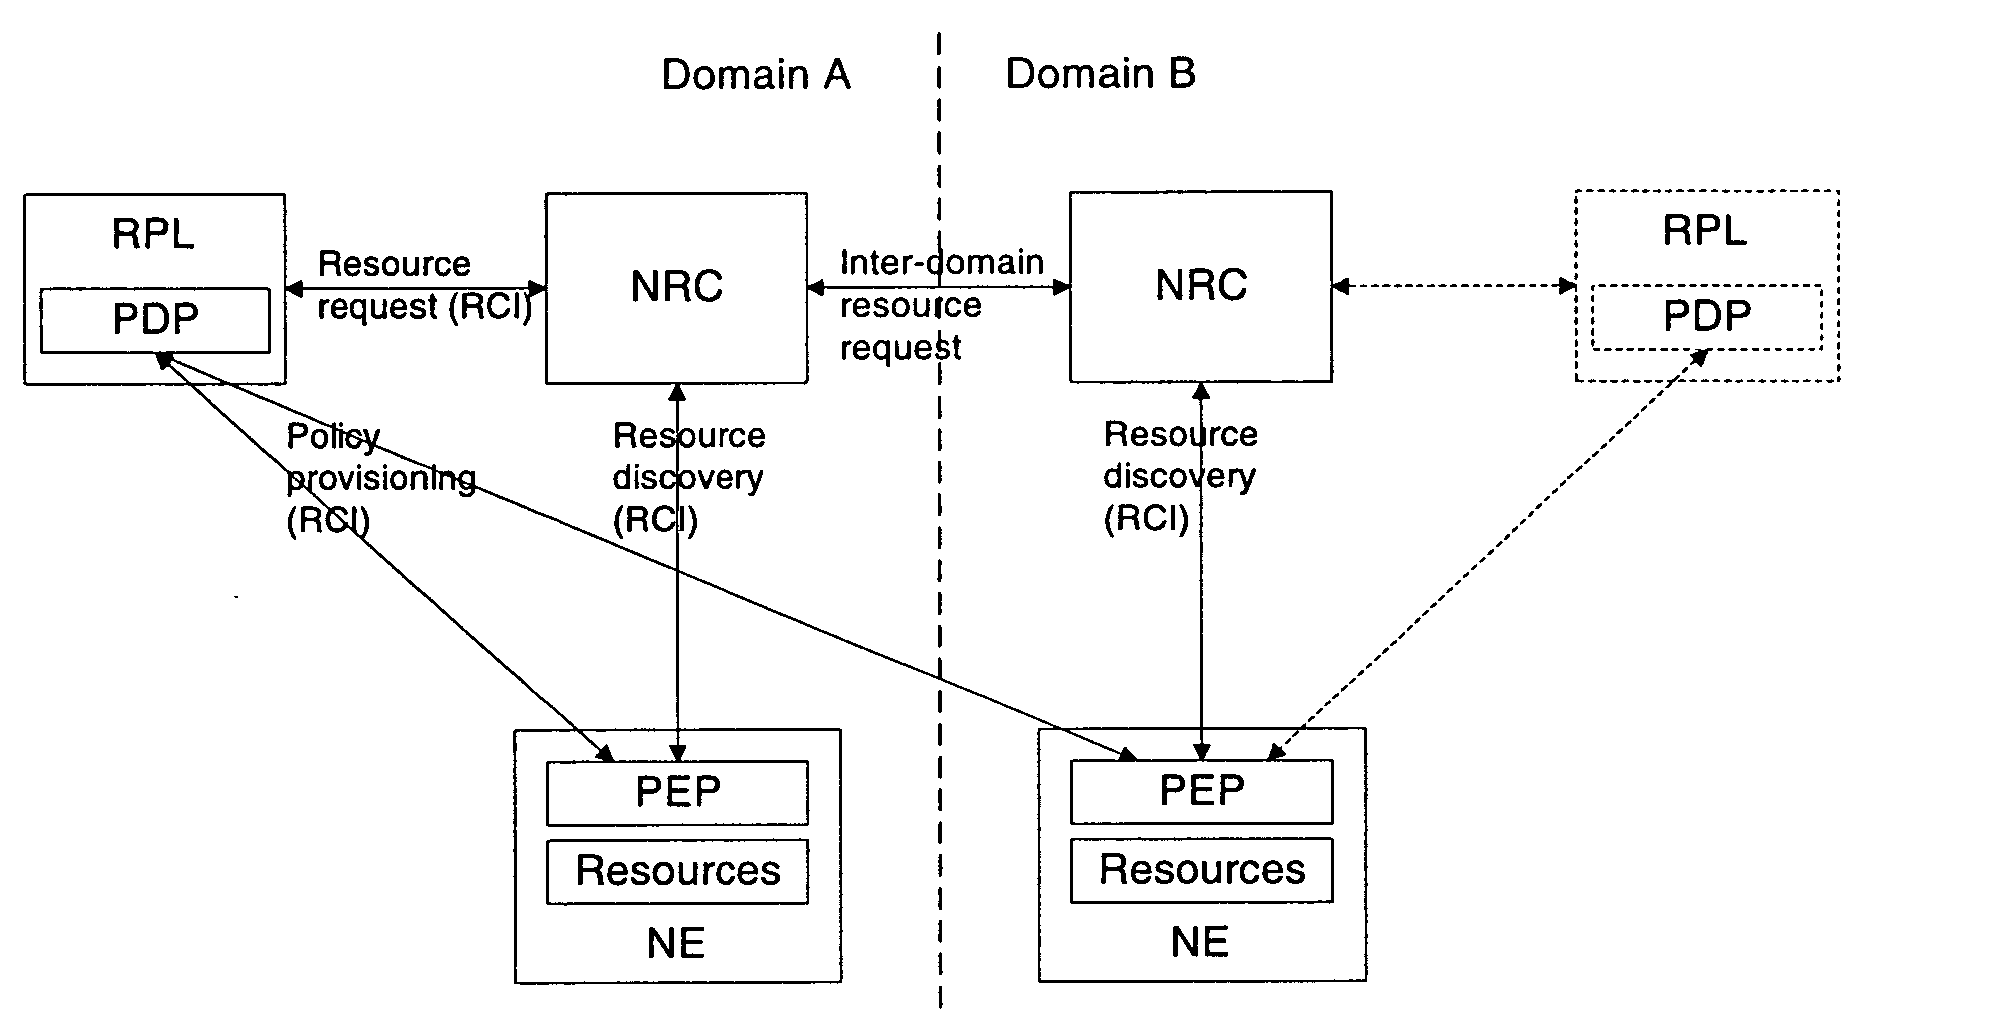 Mechanism to allow dynamic trusted association between PEP partitions and PDPs